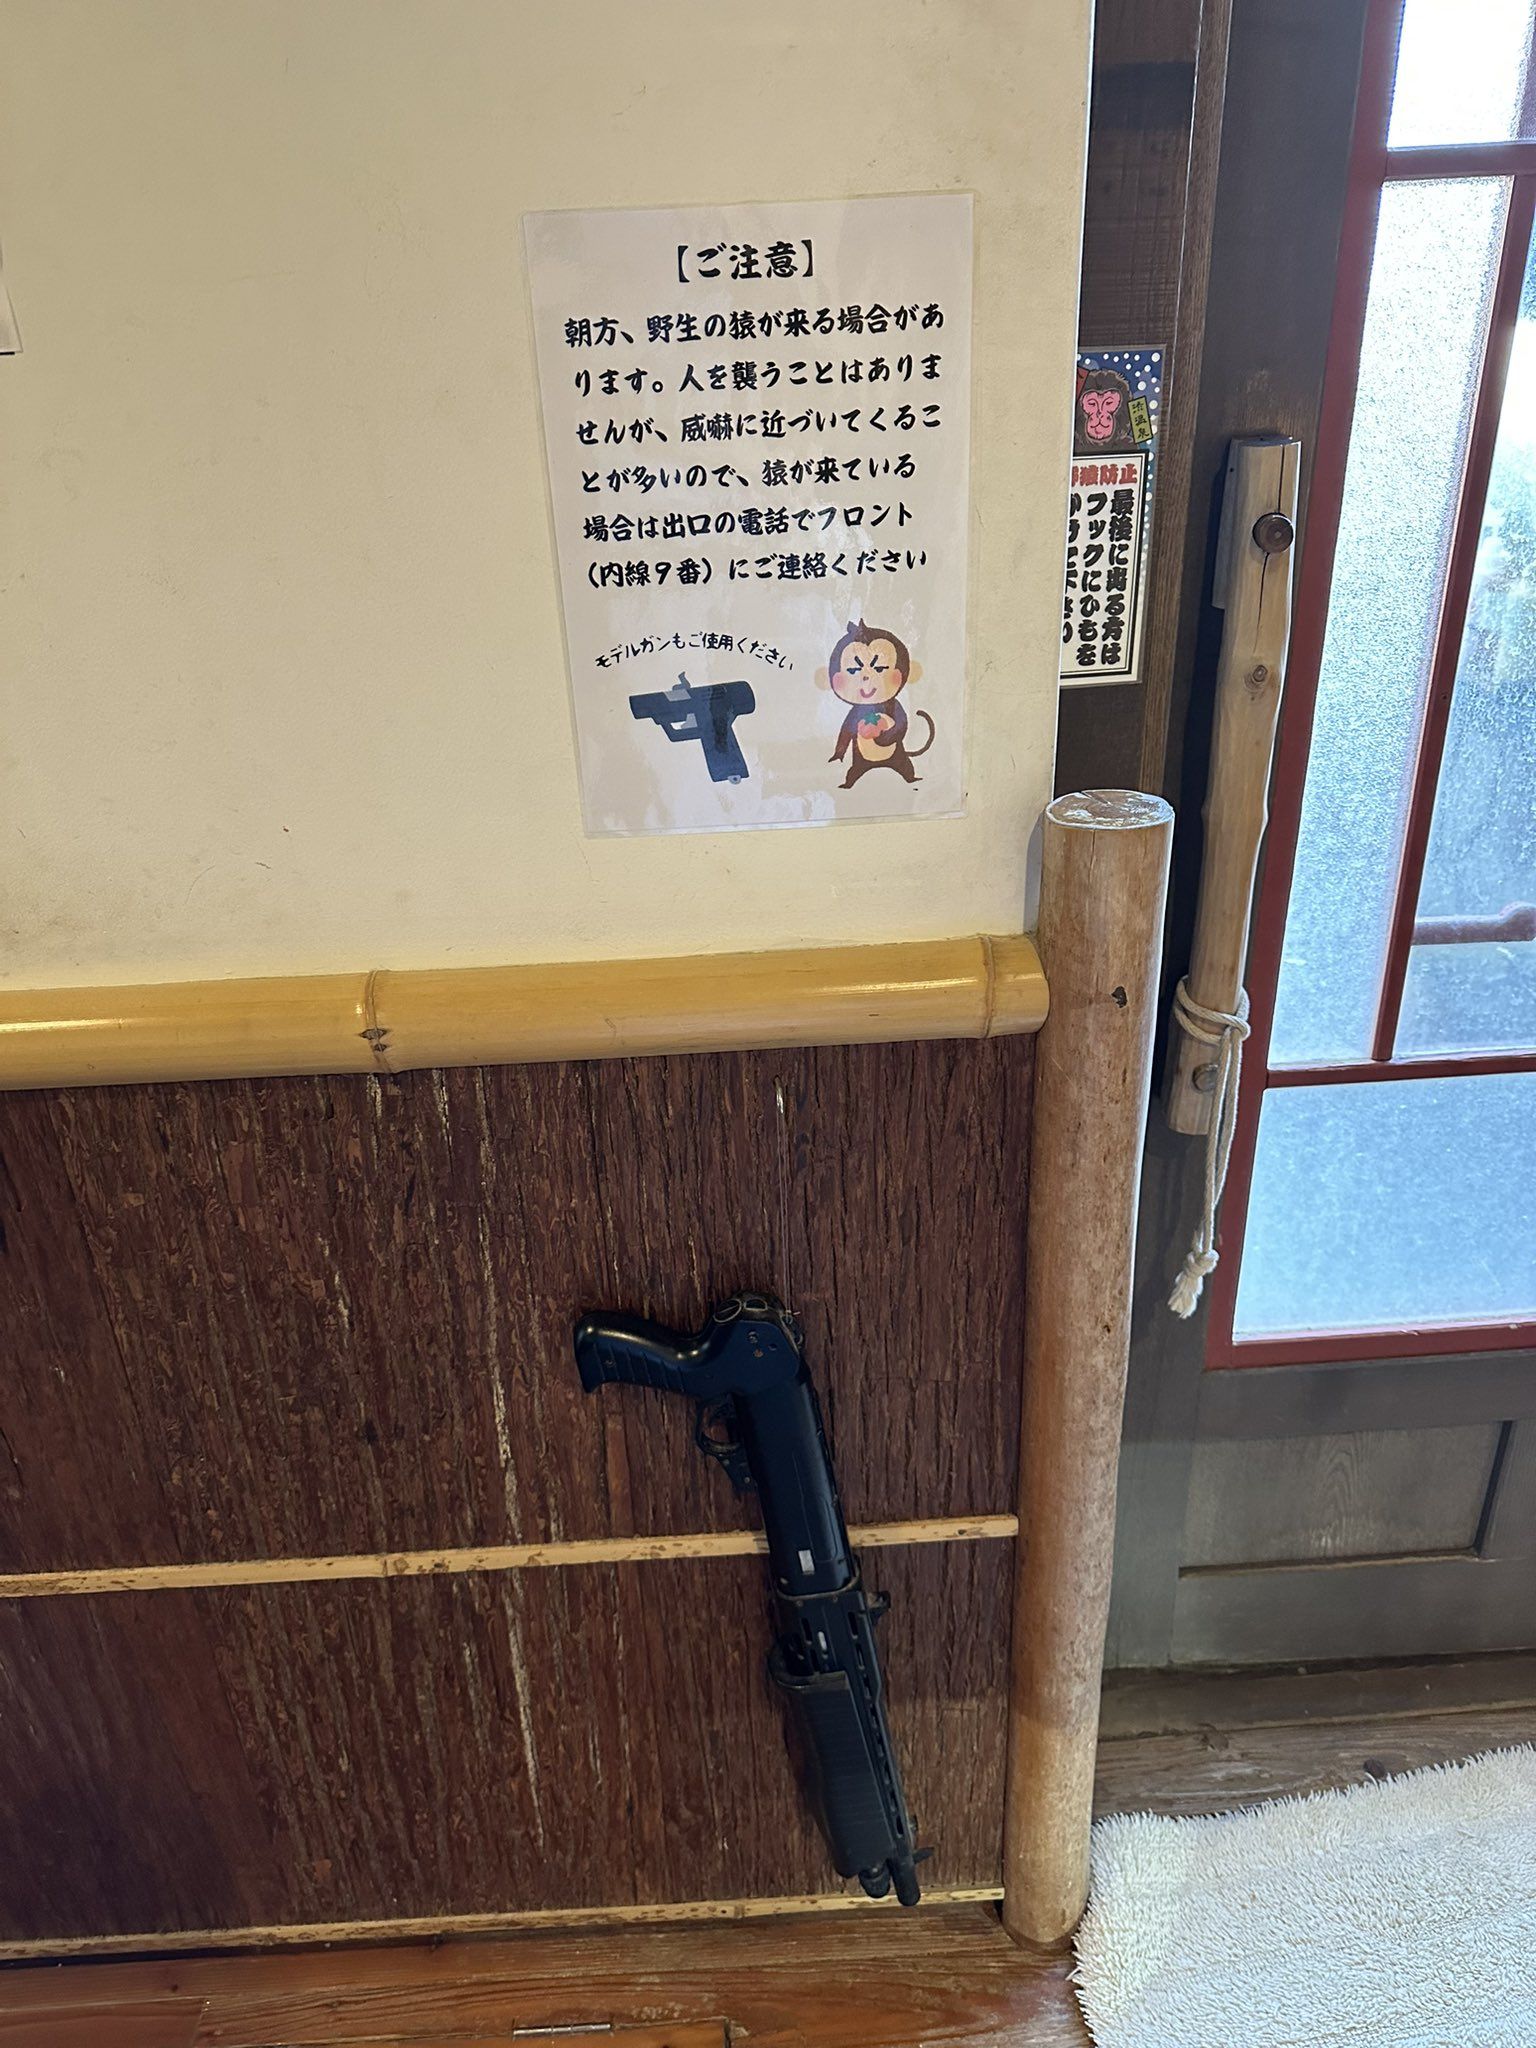 Fake gun to scare snow monkey in a Japanese onsen. This is only for women side. The men side dont have it